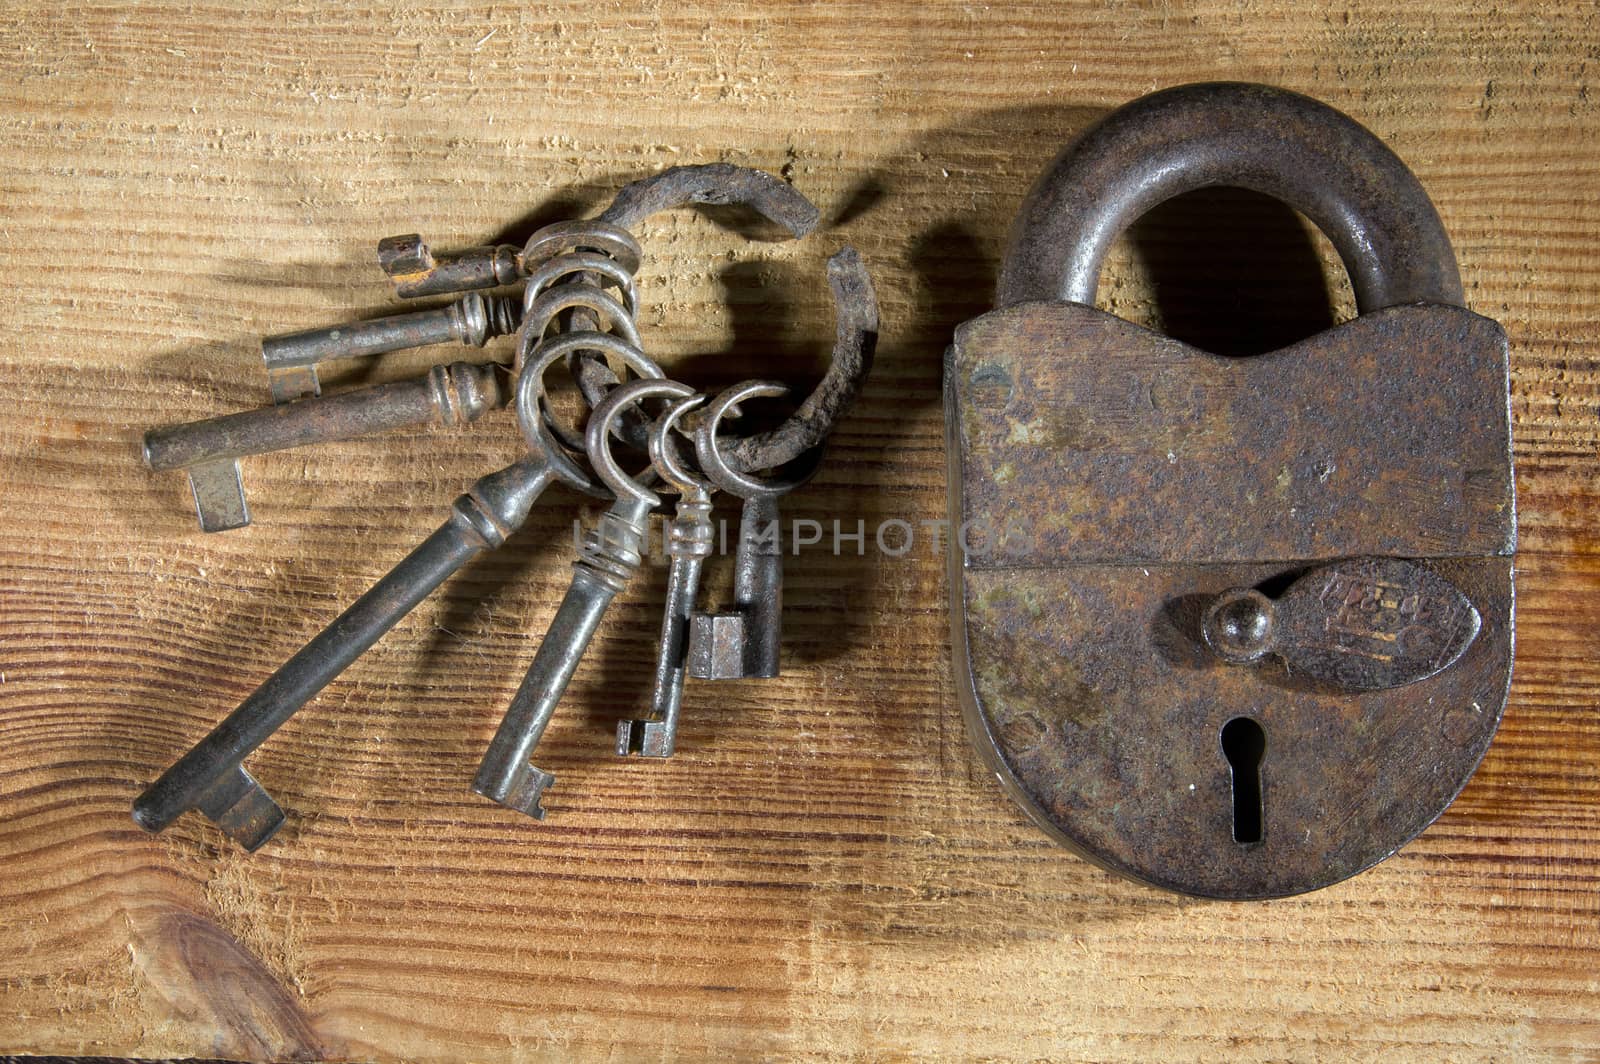 Ancient keys . Once they could open different locks